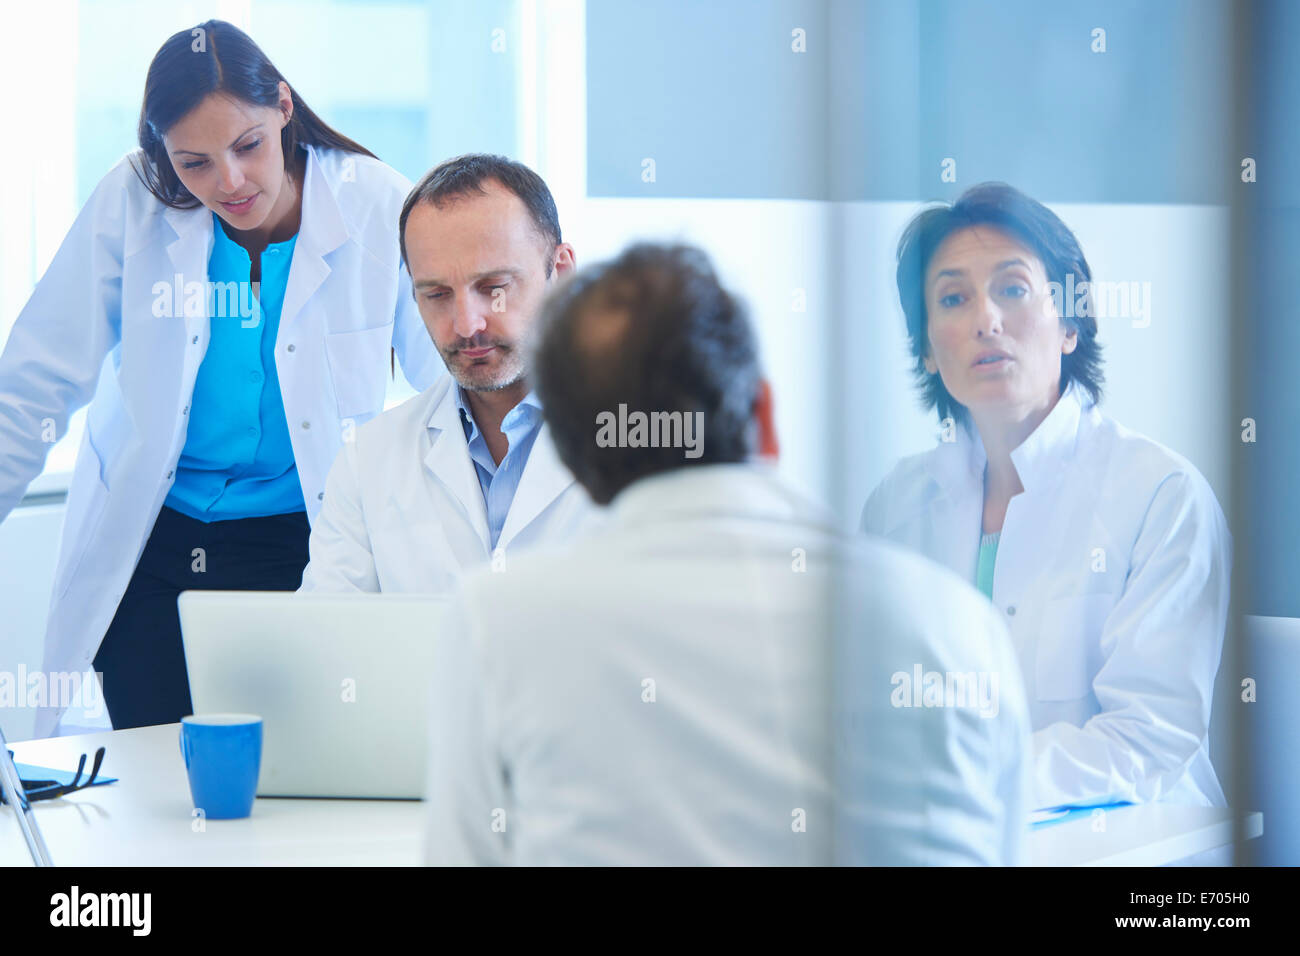 Group of researchers having meeting Stock Photo